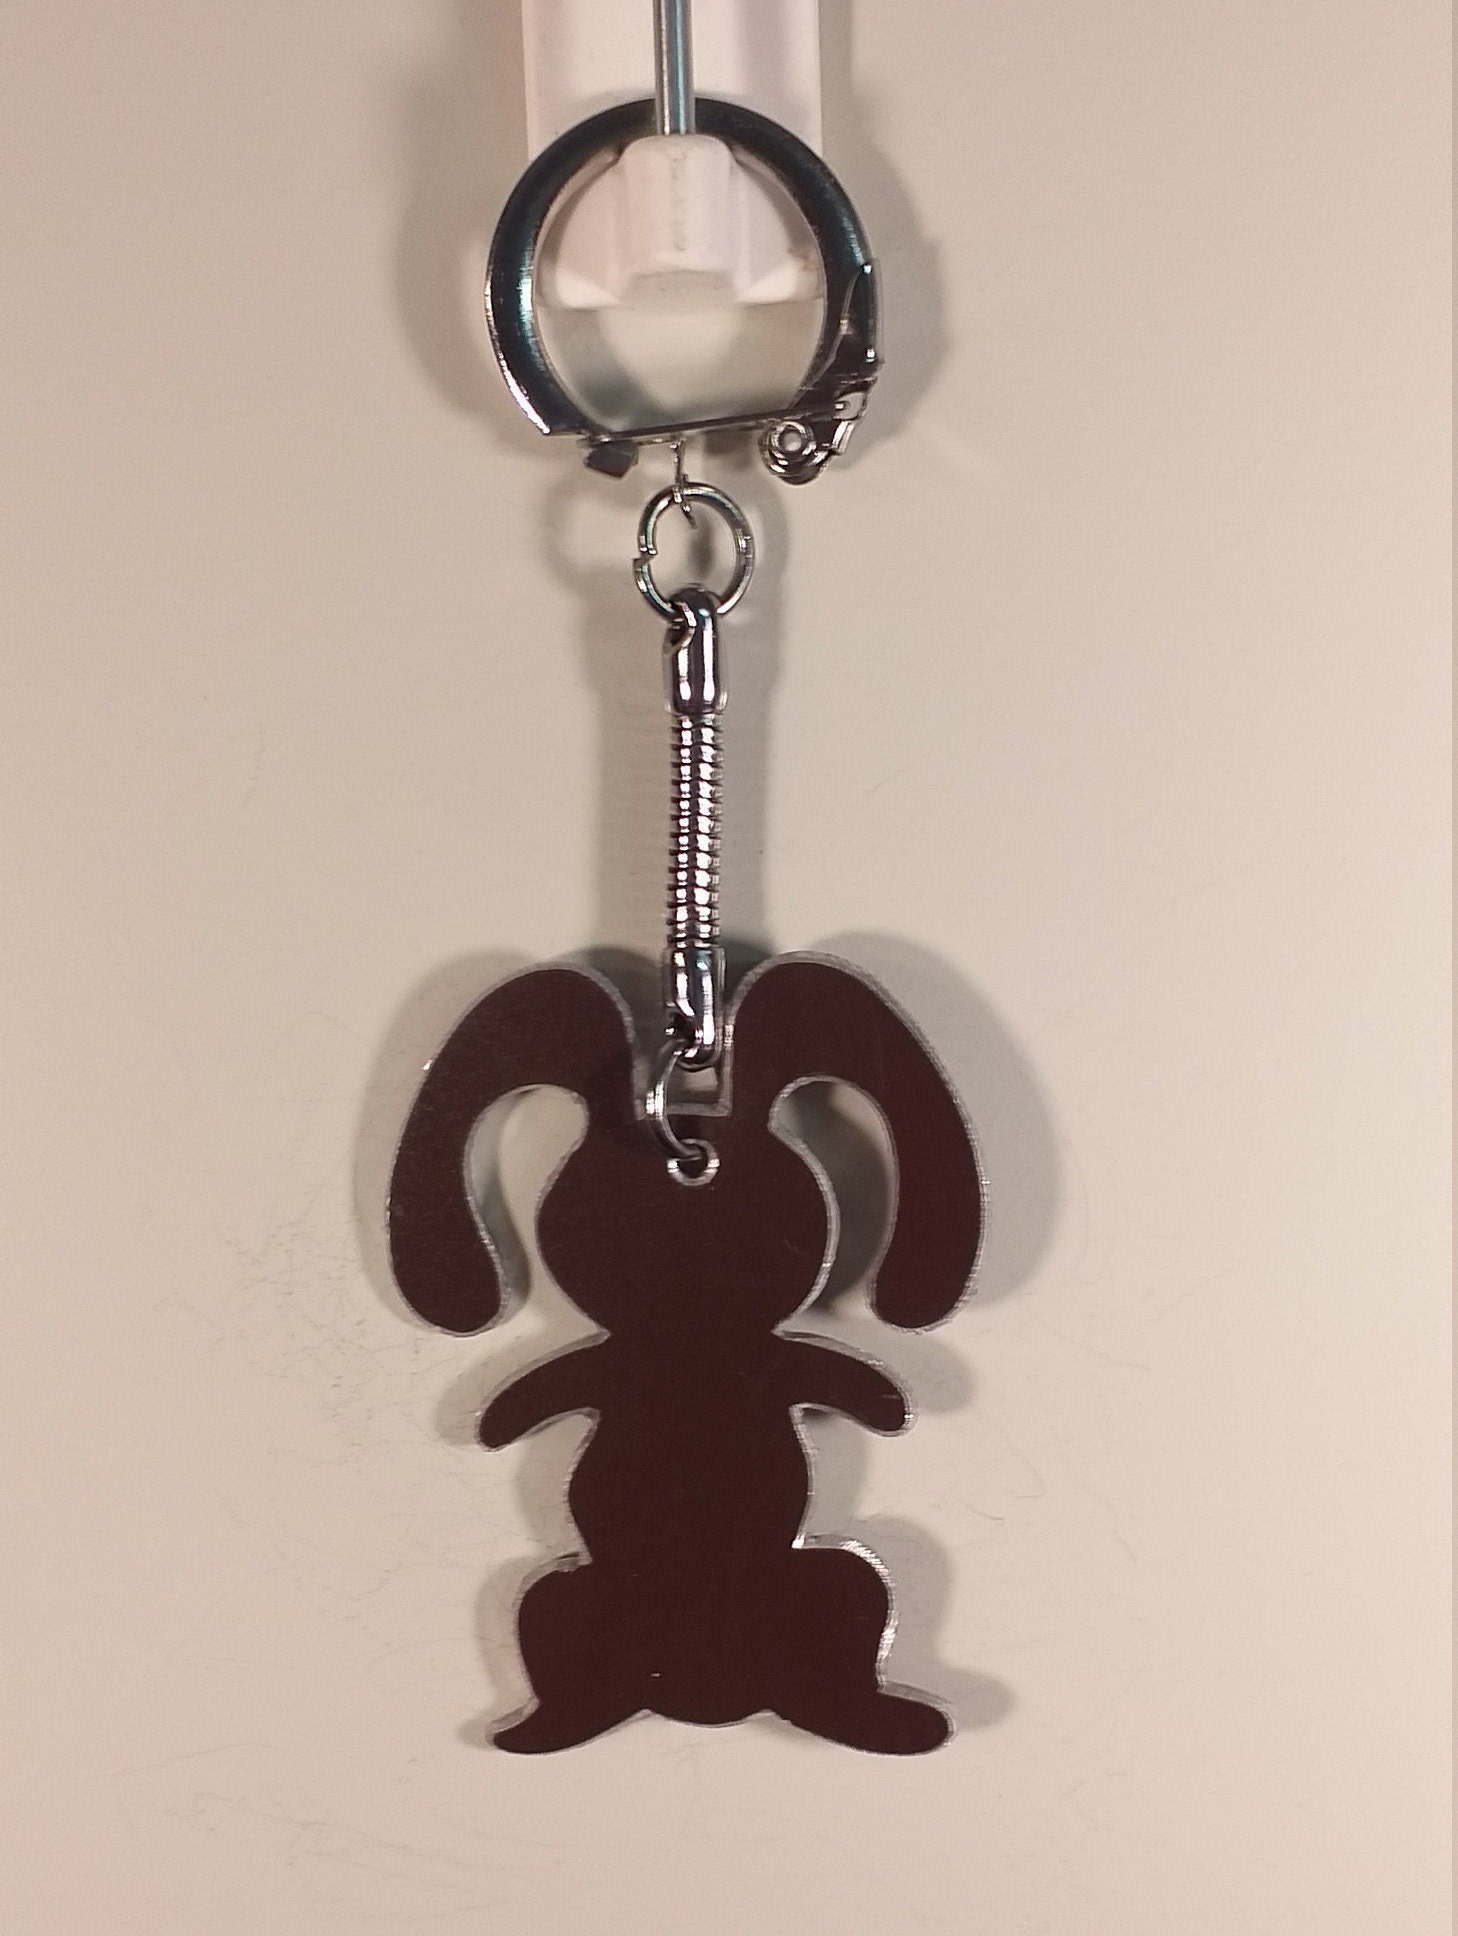 Recycled Aluminum Rabbit Key Ring Cut and Engraved by Hand